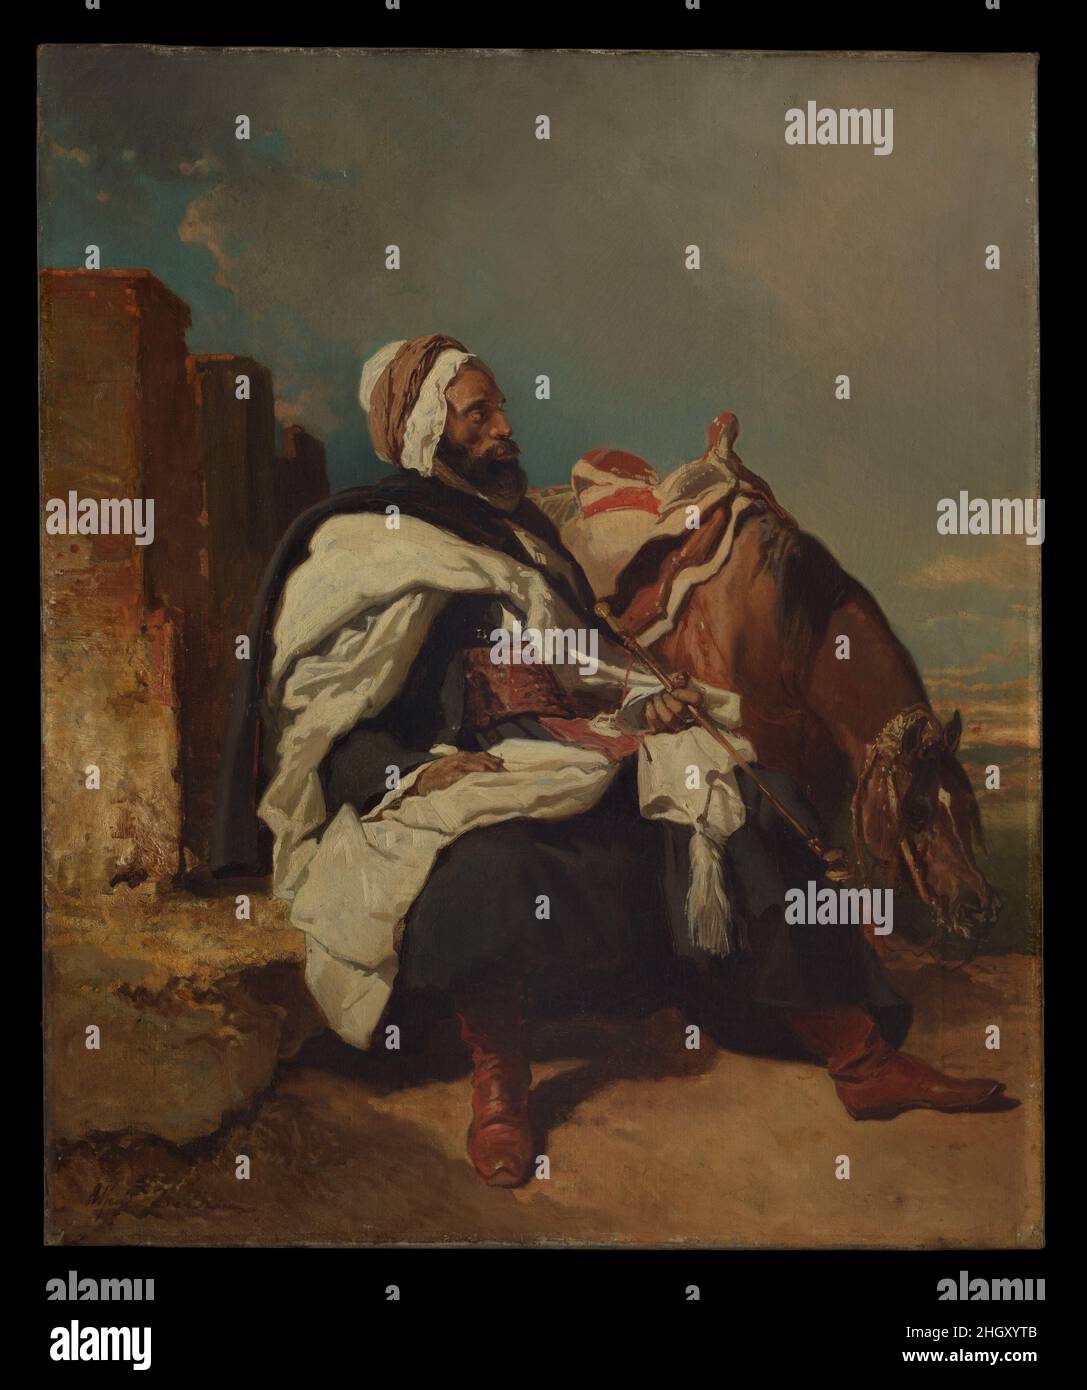 Seated Arab Man with Horse possibly ca. 1850–58 Alfred Dedreux Dedreux, a popular painter of equestrian subjects, made at least two portraits of horses belonging to the Algerian military and religious leader ‘Abd al-Qadir (1808–1863) in the 1850s. Although a foe of the French following their invasion of Algeria in 1830, ‘Abd al-Qadir eventually earned the respect and admiration of his adversaries. It cannot be established with certainty that this is a portrait, yet the man depicted resembles the chieftan, whose likeness was widely disseminated through paintings, prints, and photographs.. Seate Stock Photo